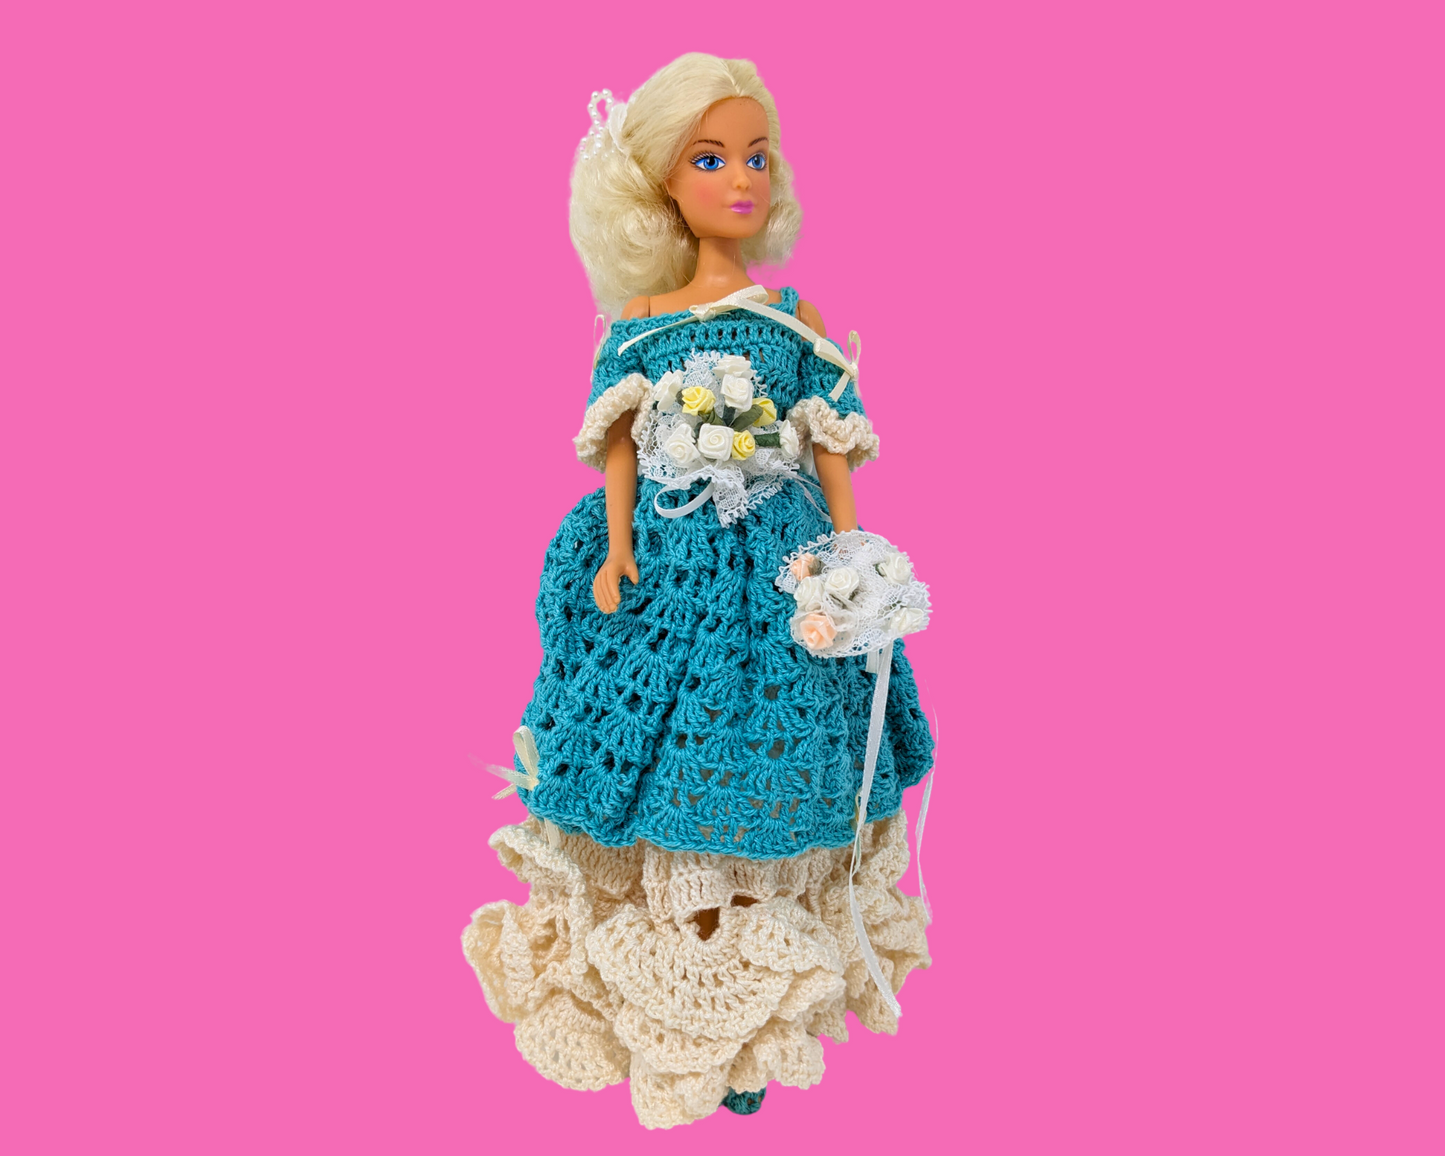 Vintage 1970's Barbie Doll with Hand Crocheted Outfit